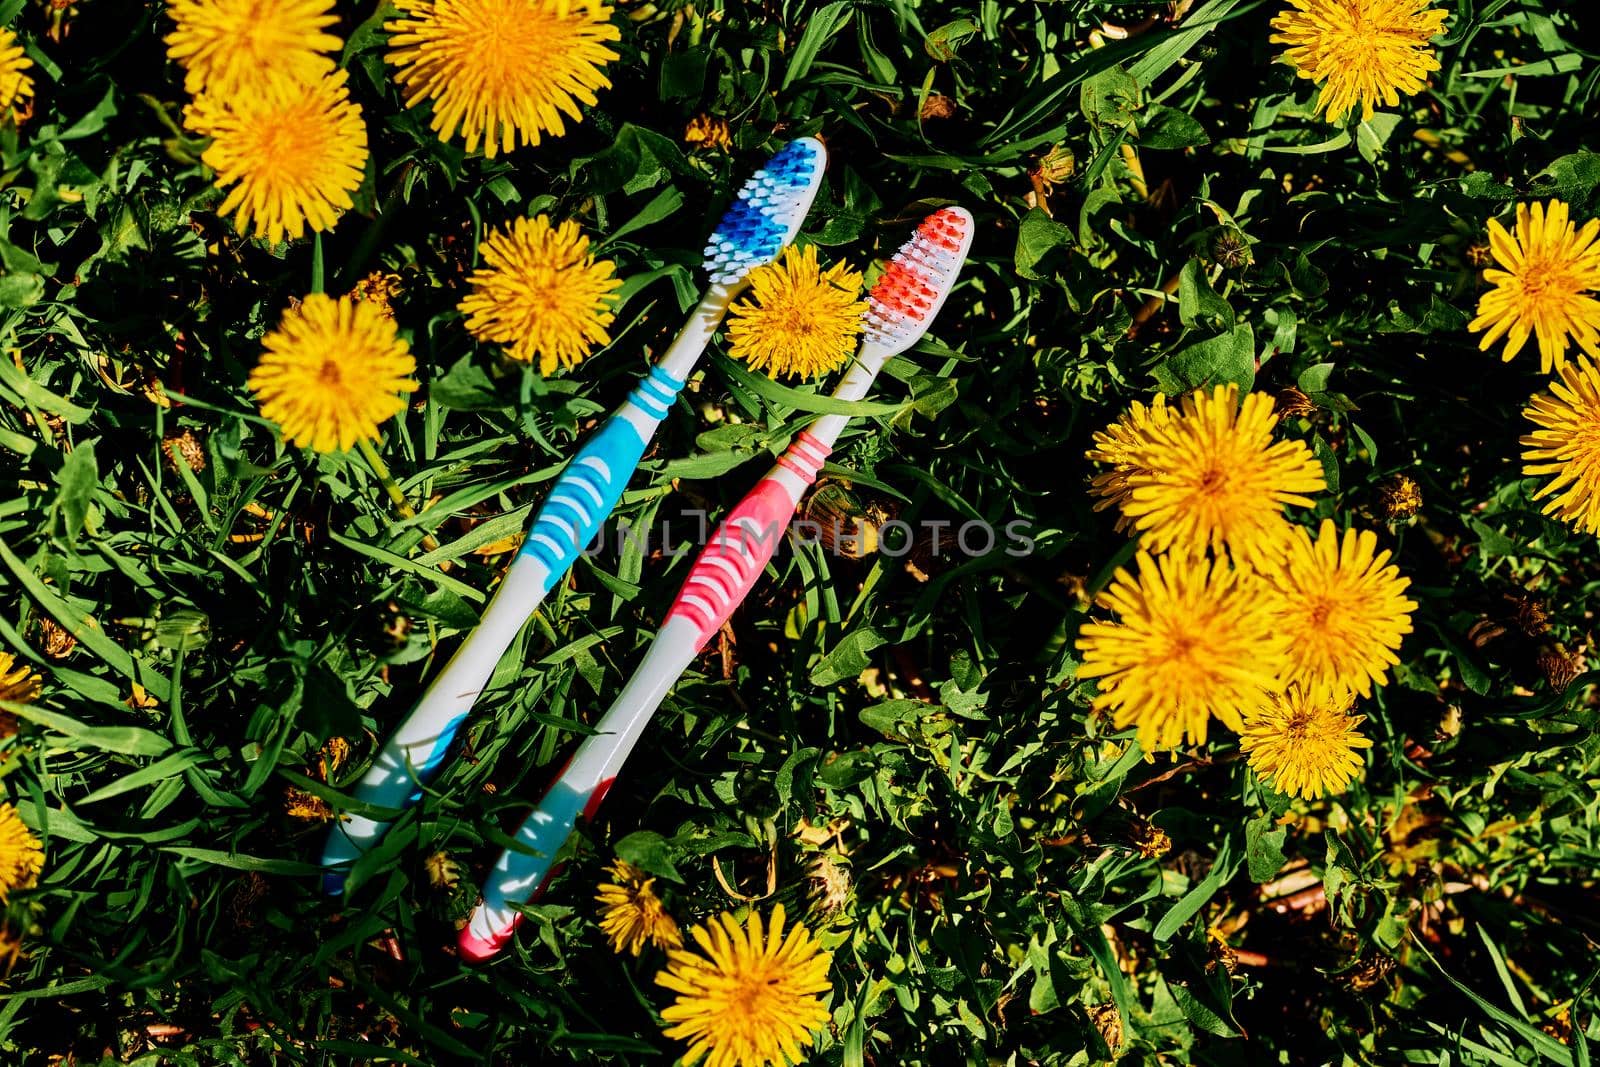 a small brush with a long handle, used for cleaning the teeth. Two toothbrushes on a green and yellow dandelion carpet.